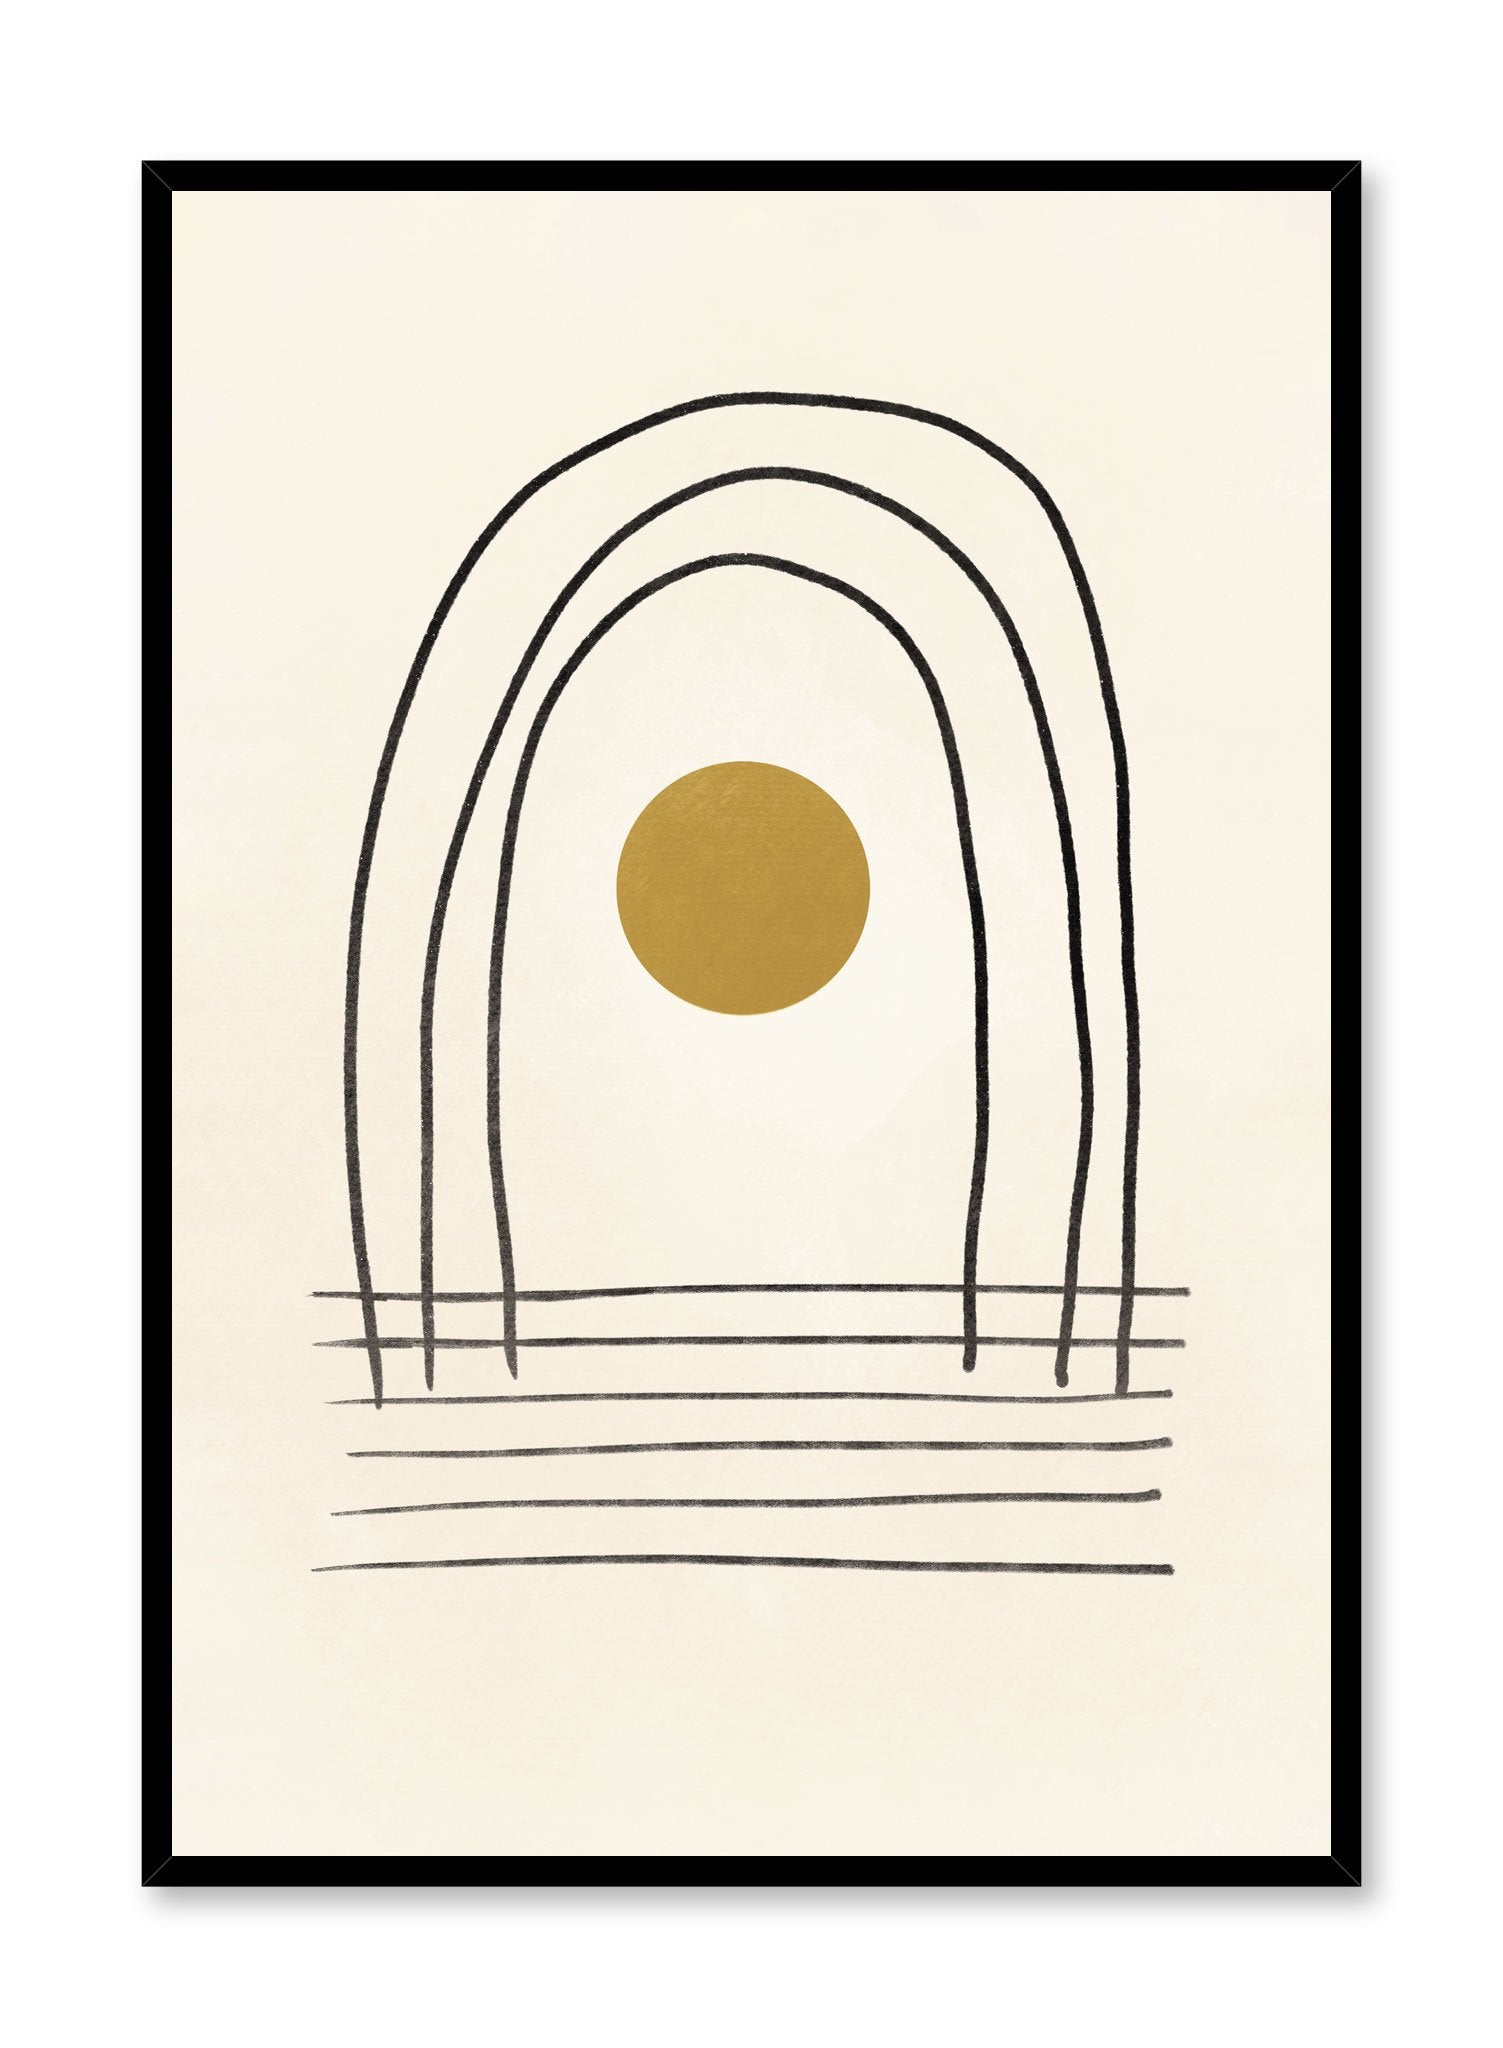 Modern minimalist poster by Opposite Wall with abstract design of Rainbow Room by Toffie Affichiste